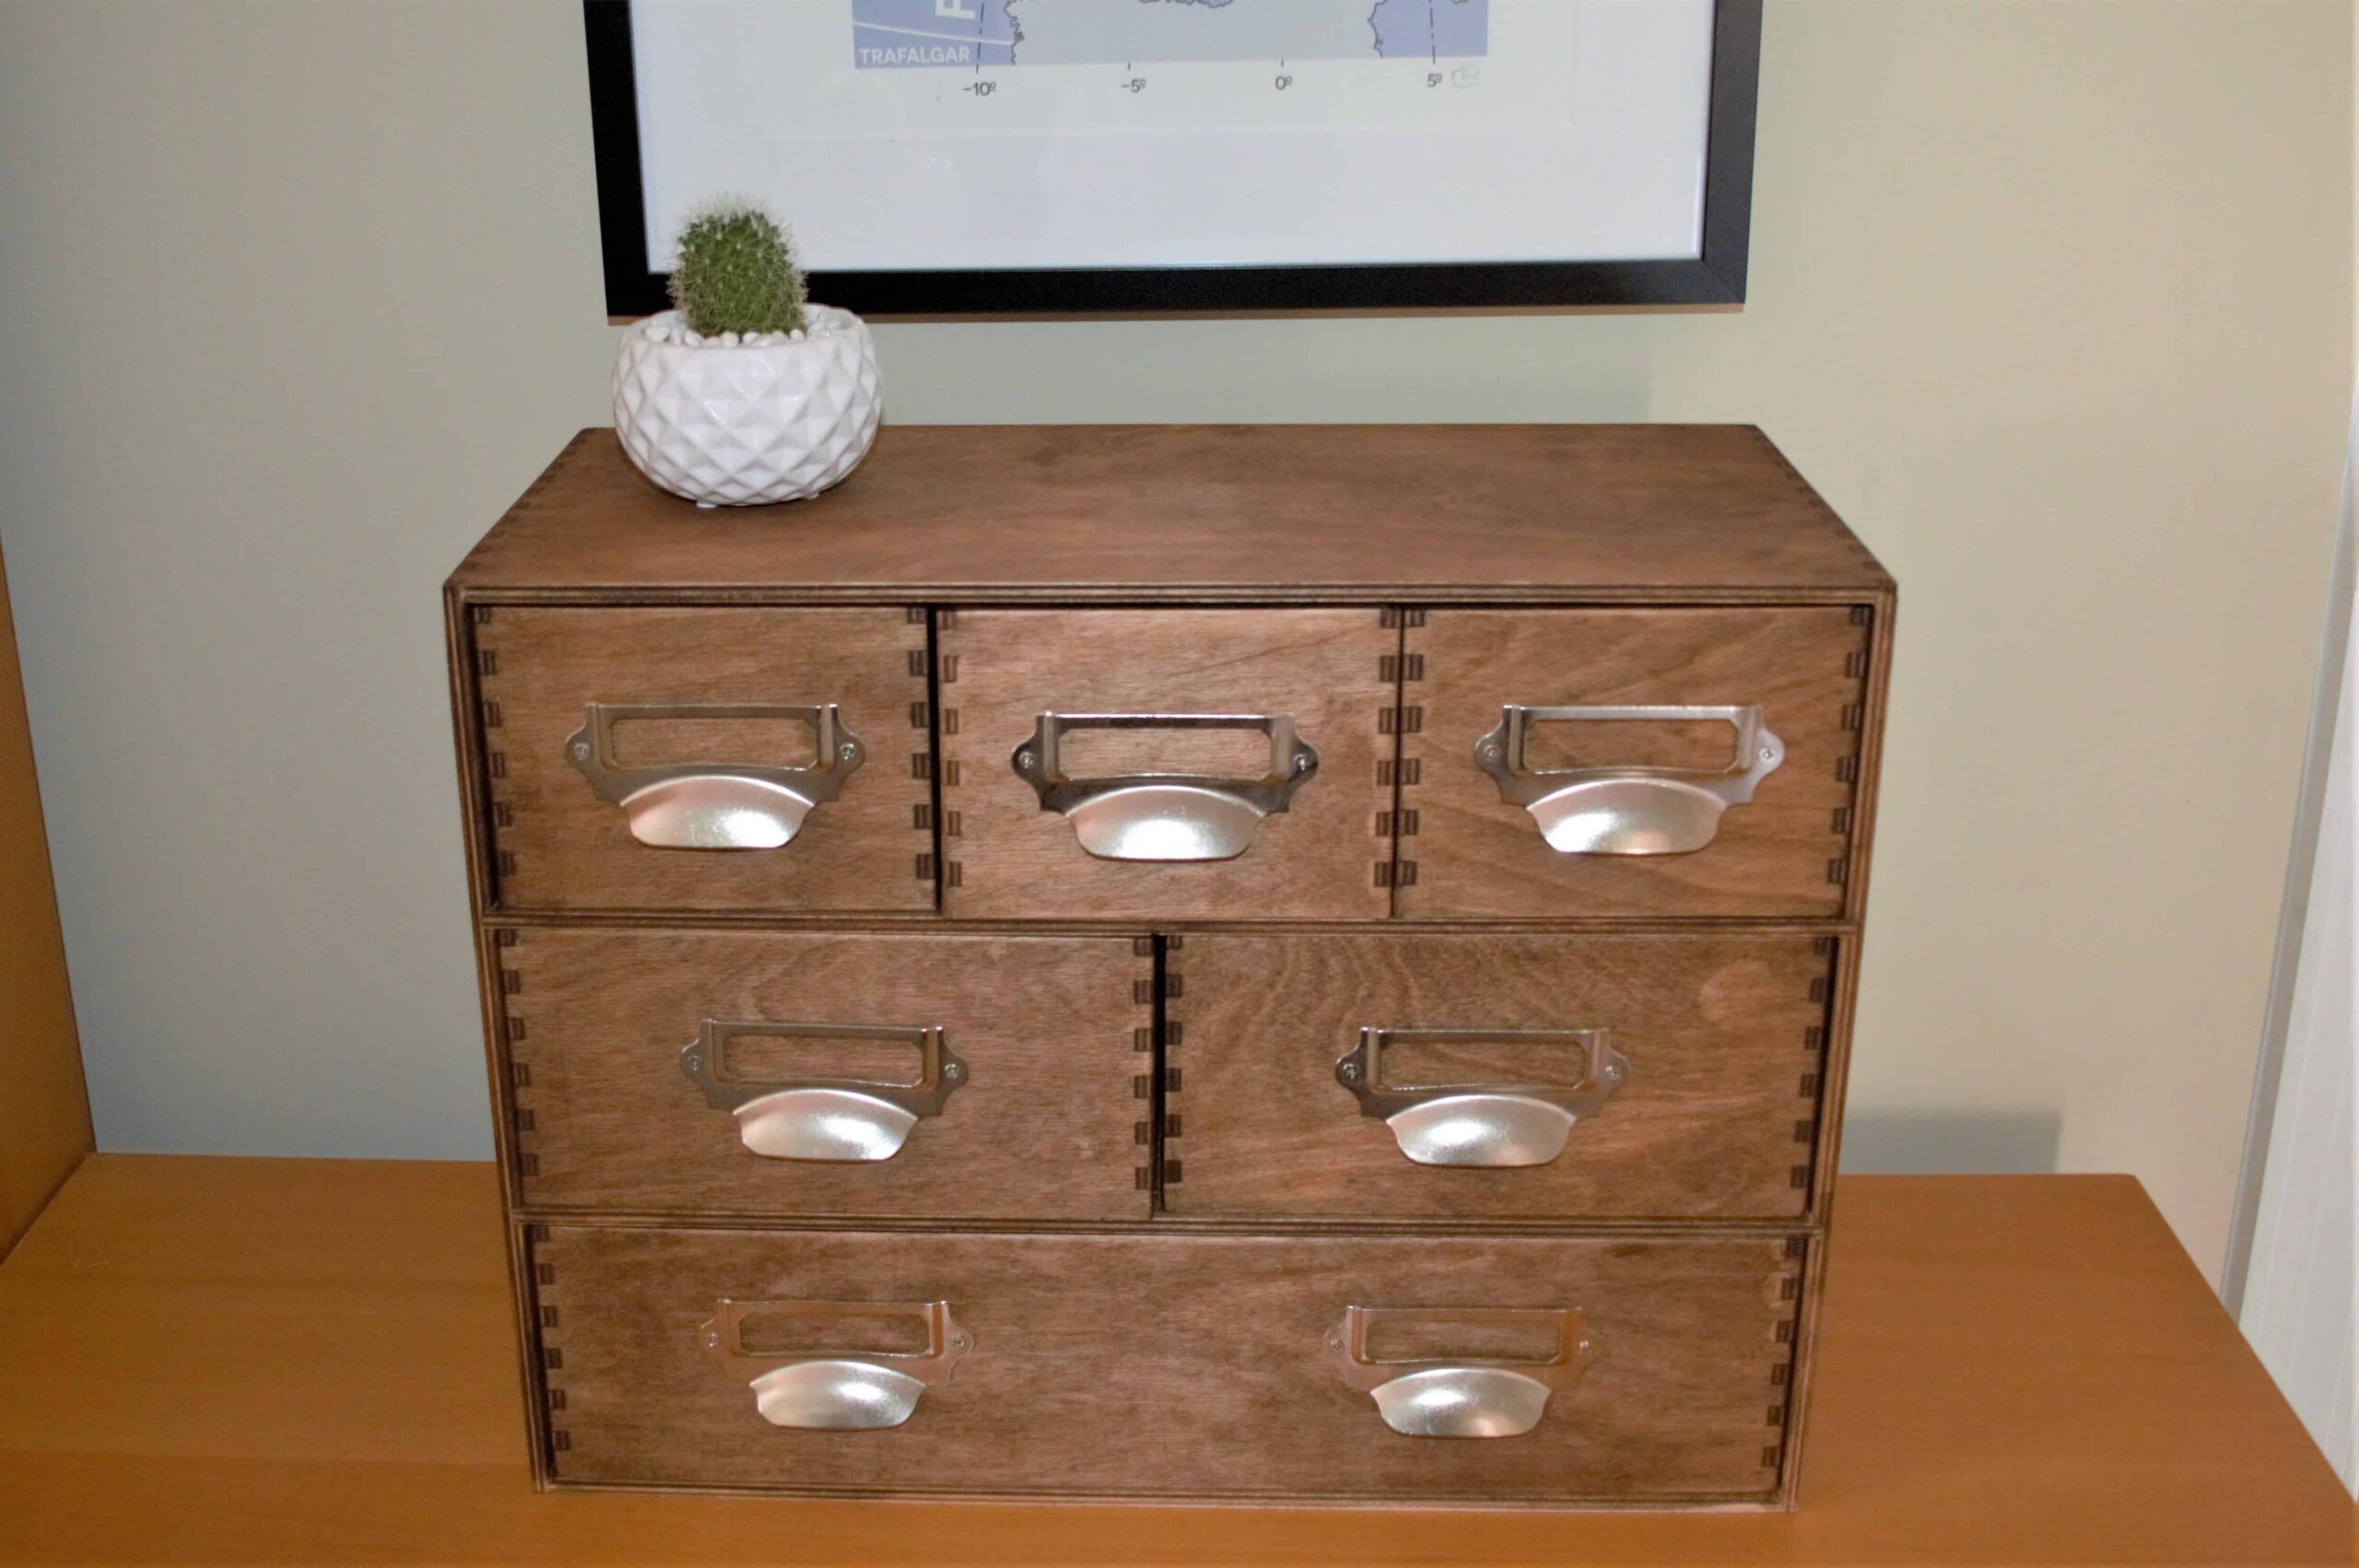 DIY IKEA Moppe Apothecary Storage Chest Hack